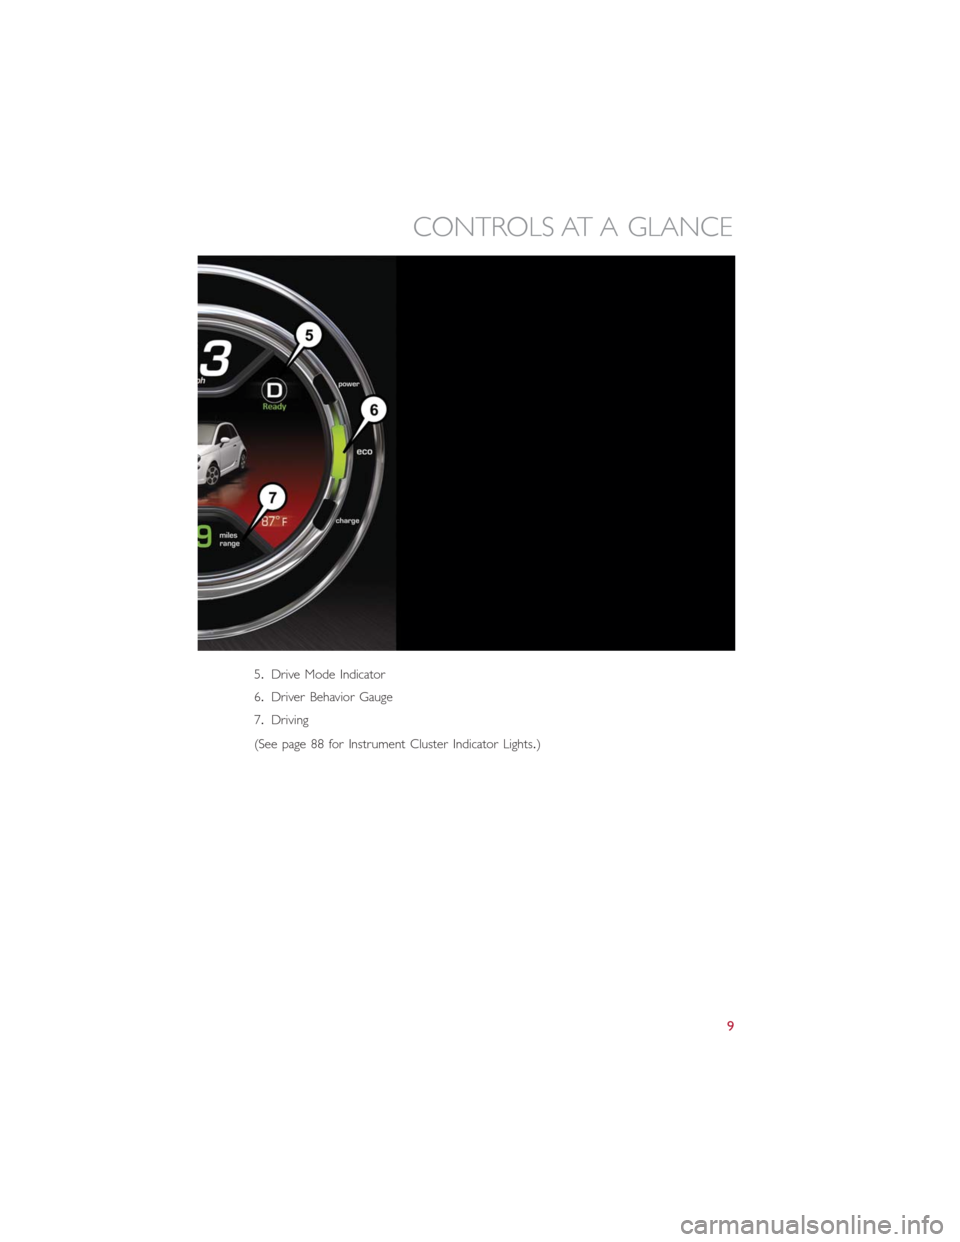 FIAT 500E 2016 2.G User Guide 5.Drive Mode Indicator
6.Driver Behavior Gauge
7.Driving
(See page 88 for Instrument Cluster Indicator Lights.)
CONTROLS AT A GLANCE
9 